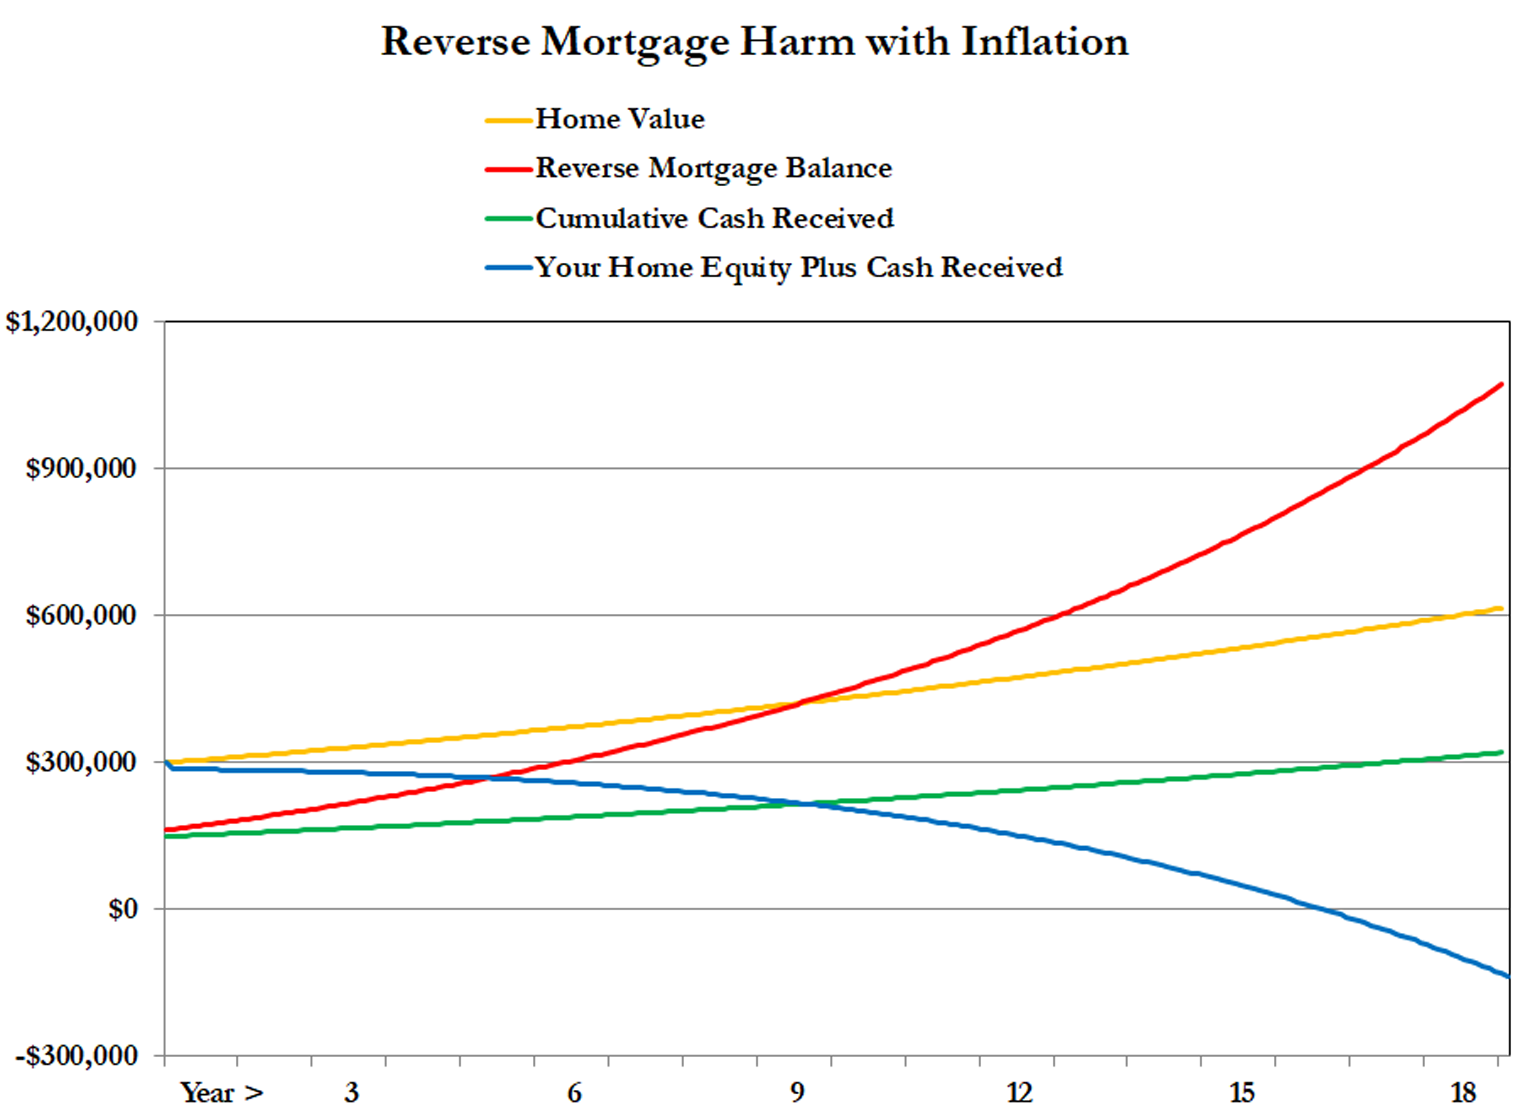 inflation worsens the harm of a reverse mortgage